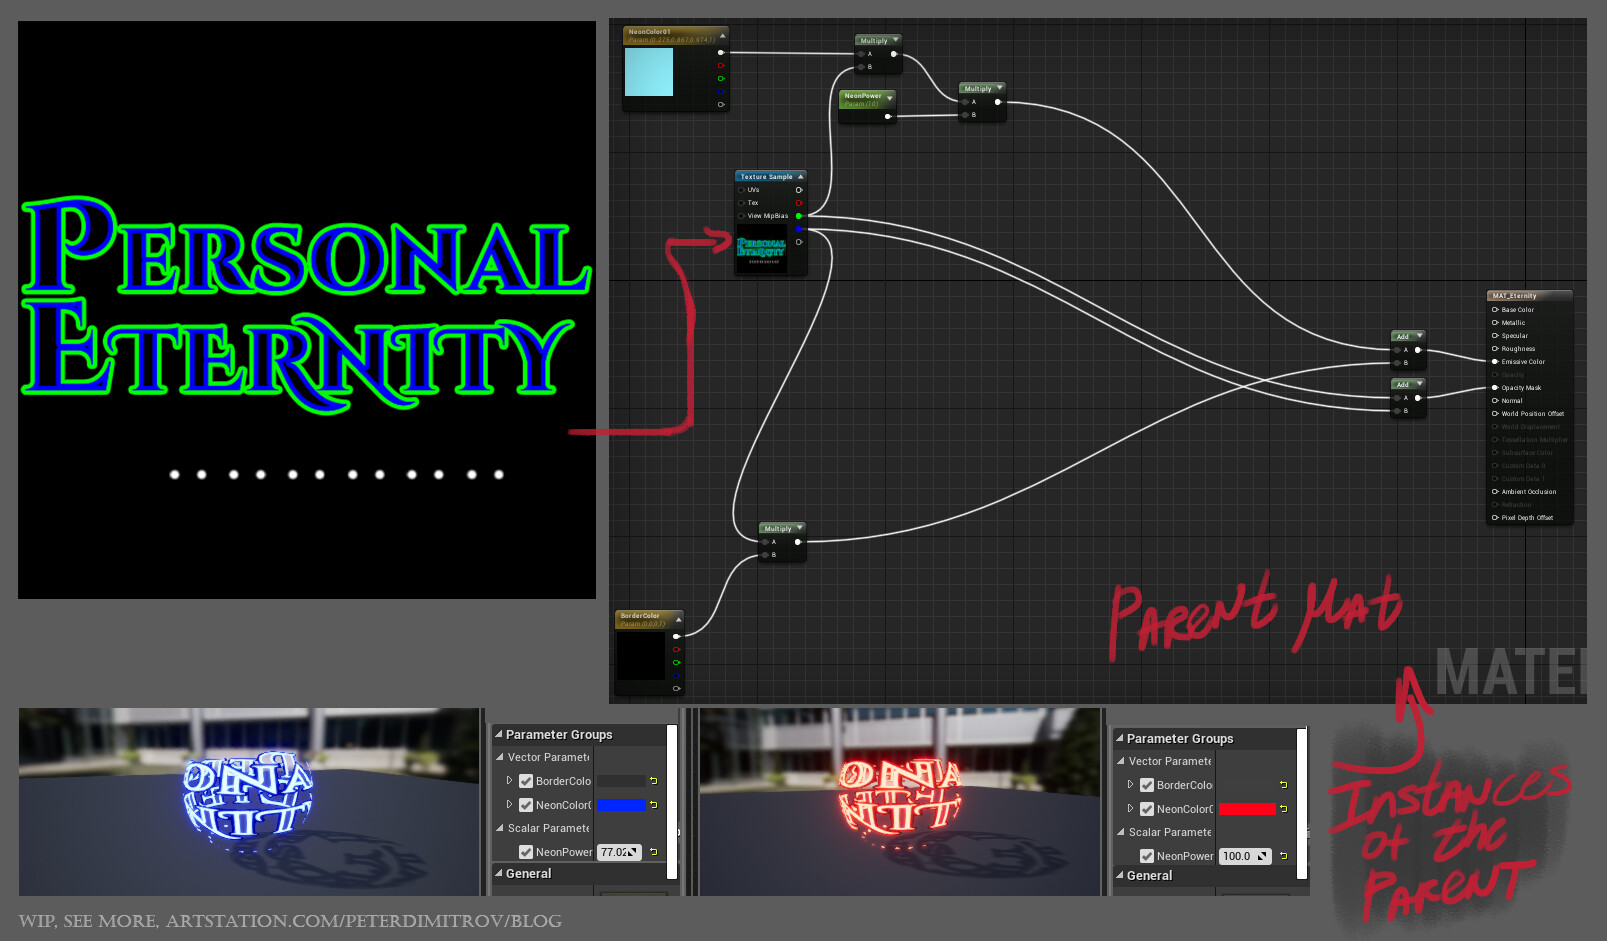 Unreal material graph UI view. Showcases the set up of the shader used for the texts.